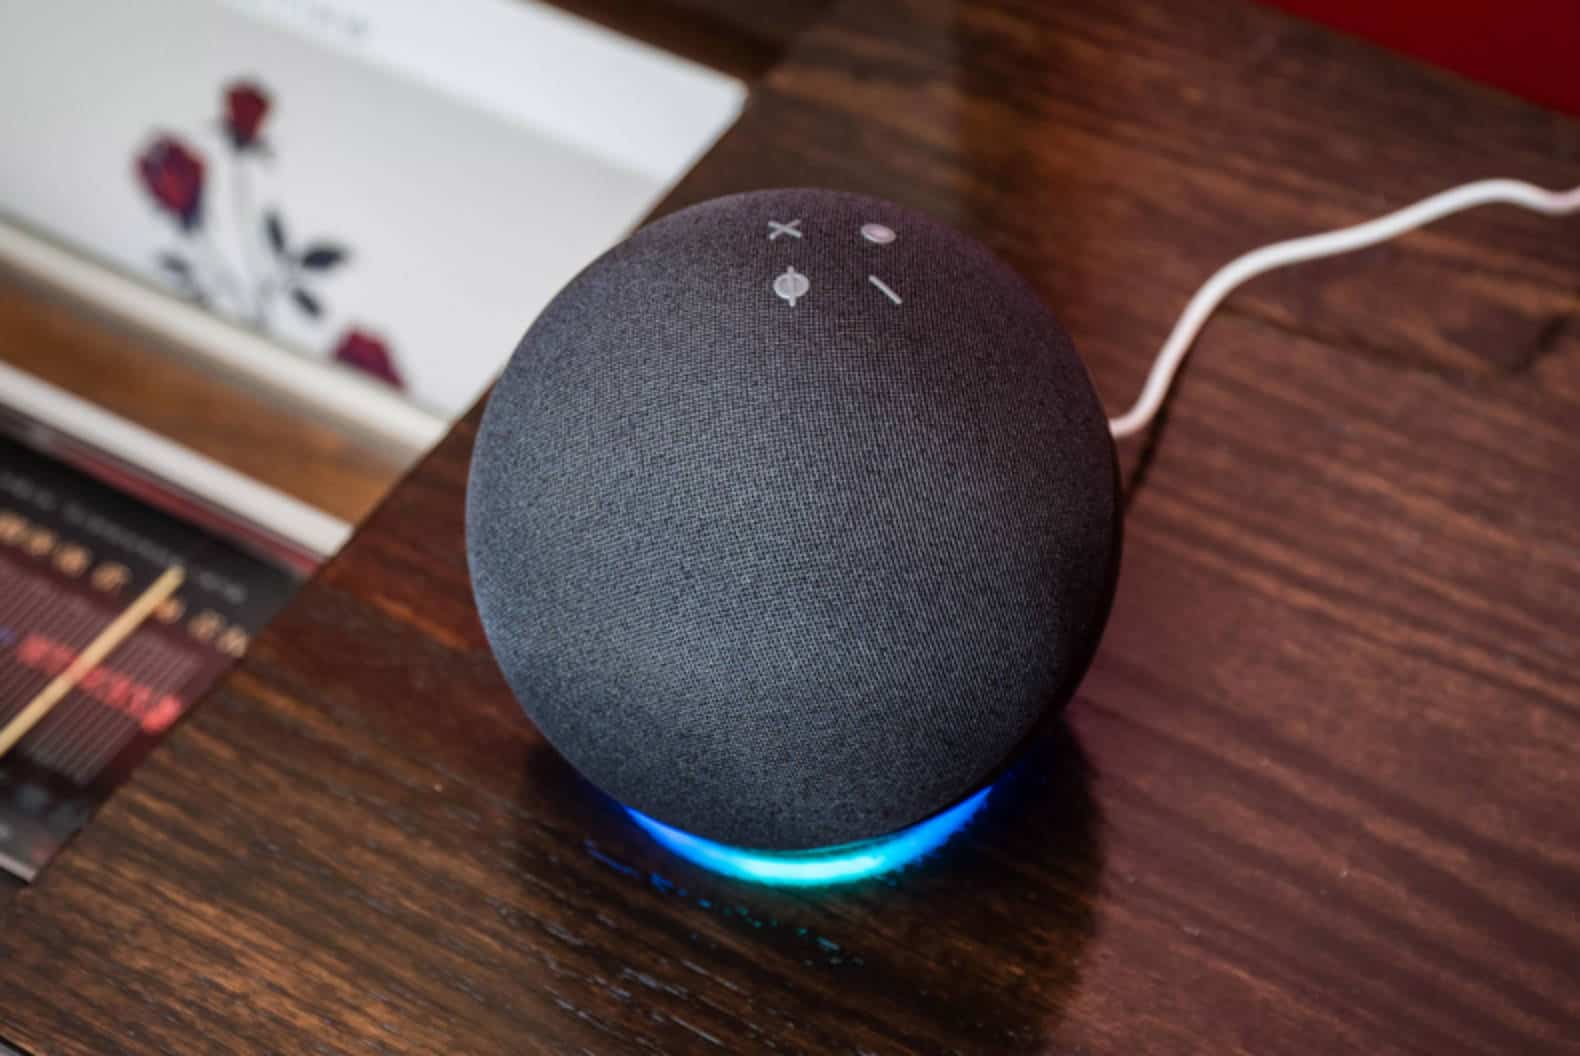 How To Connect LED Lights To Google Home